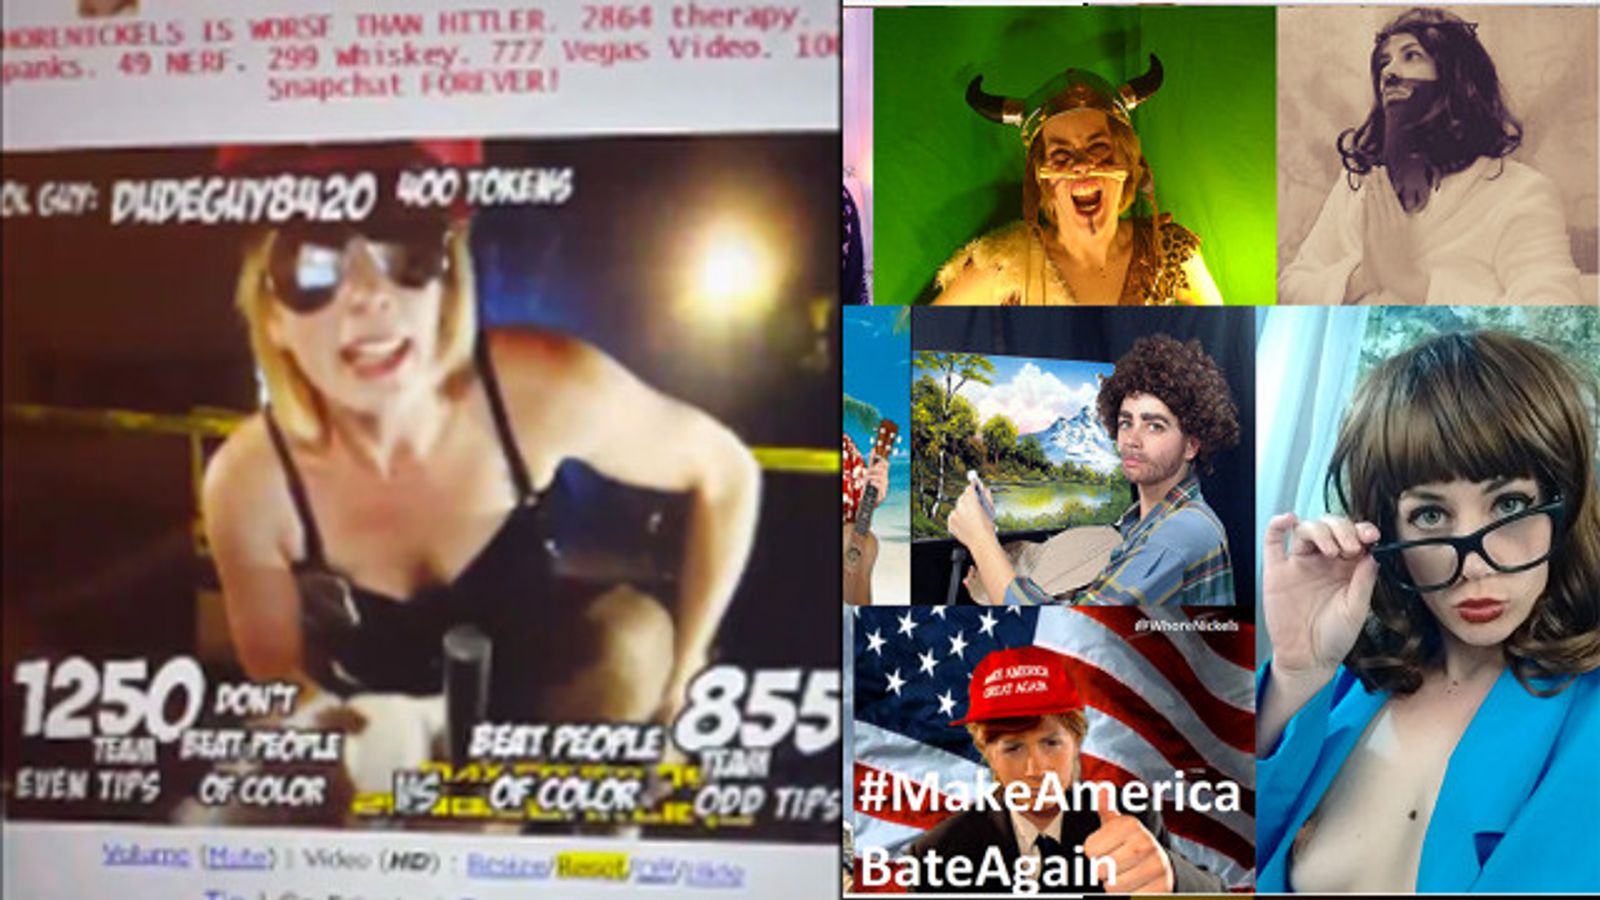 MyFreeCams Responds to 'WhoreNickels' Cam Show Controversy